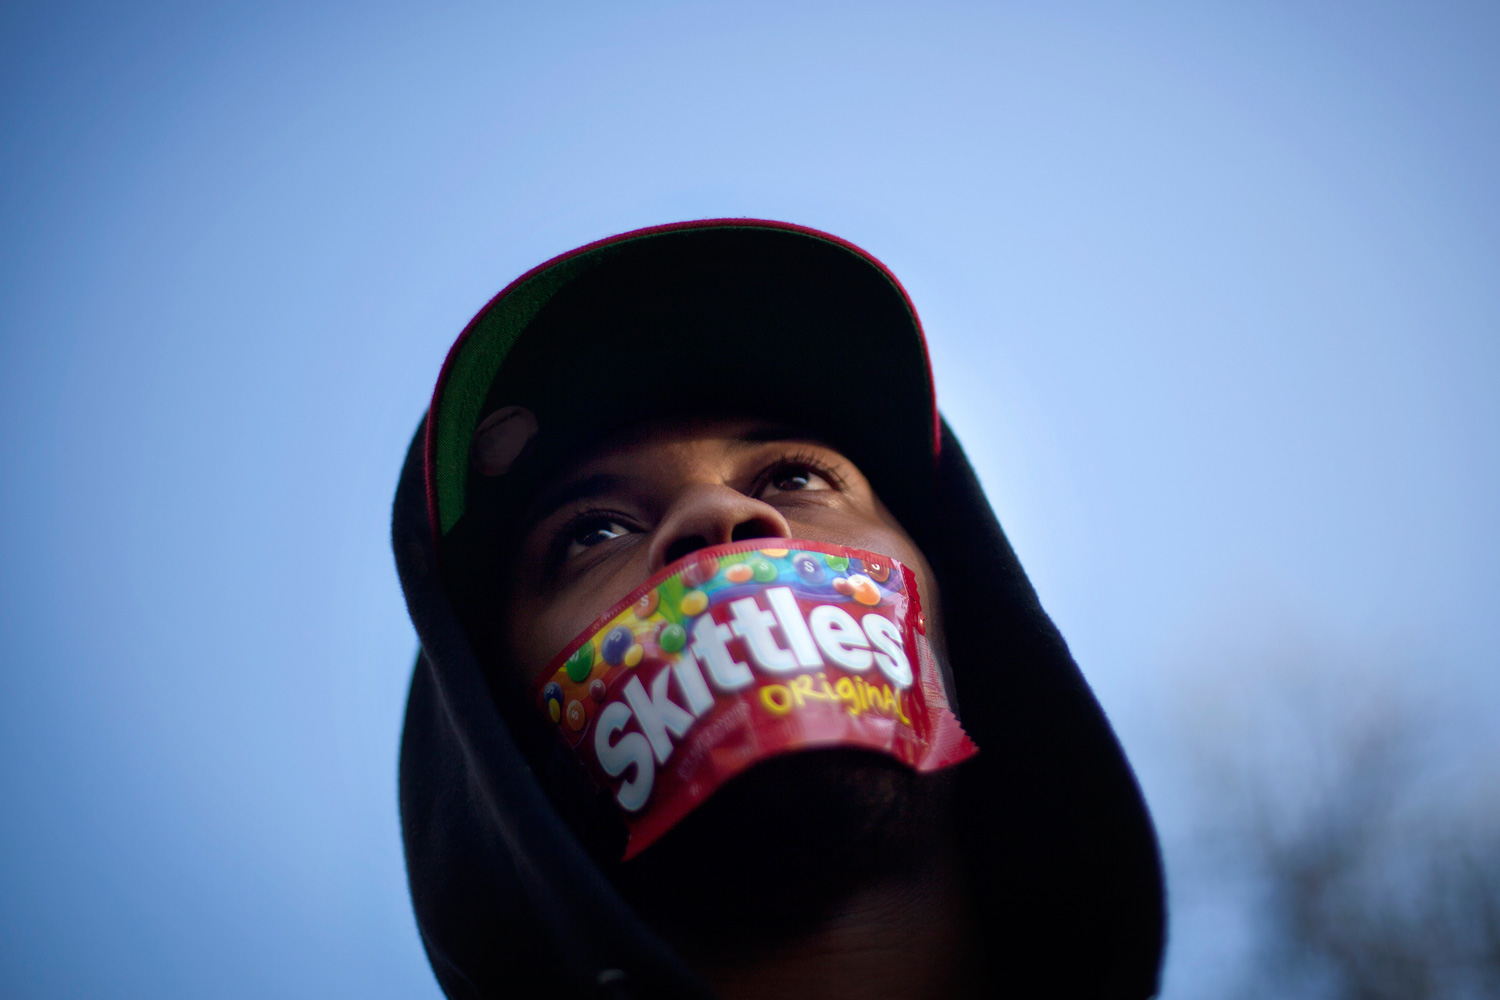 March 26, 2012. Jajuan Kelley of Atlanta wears a Skittles wrapper over his mouth during a rally in memory of Trayvon Martin, the unarmed 17-year-old who was killed by a Florida neighborhood watch captain while returning from a convenience store with a bag of Skittles and an iced tea.